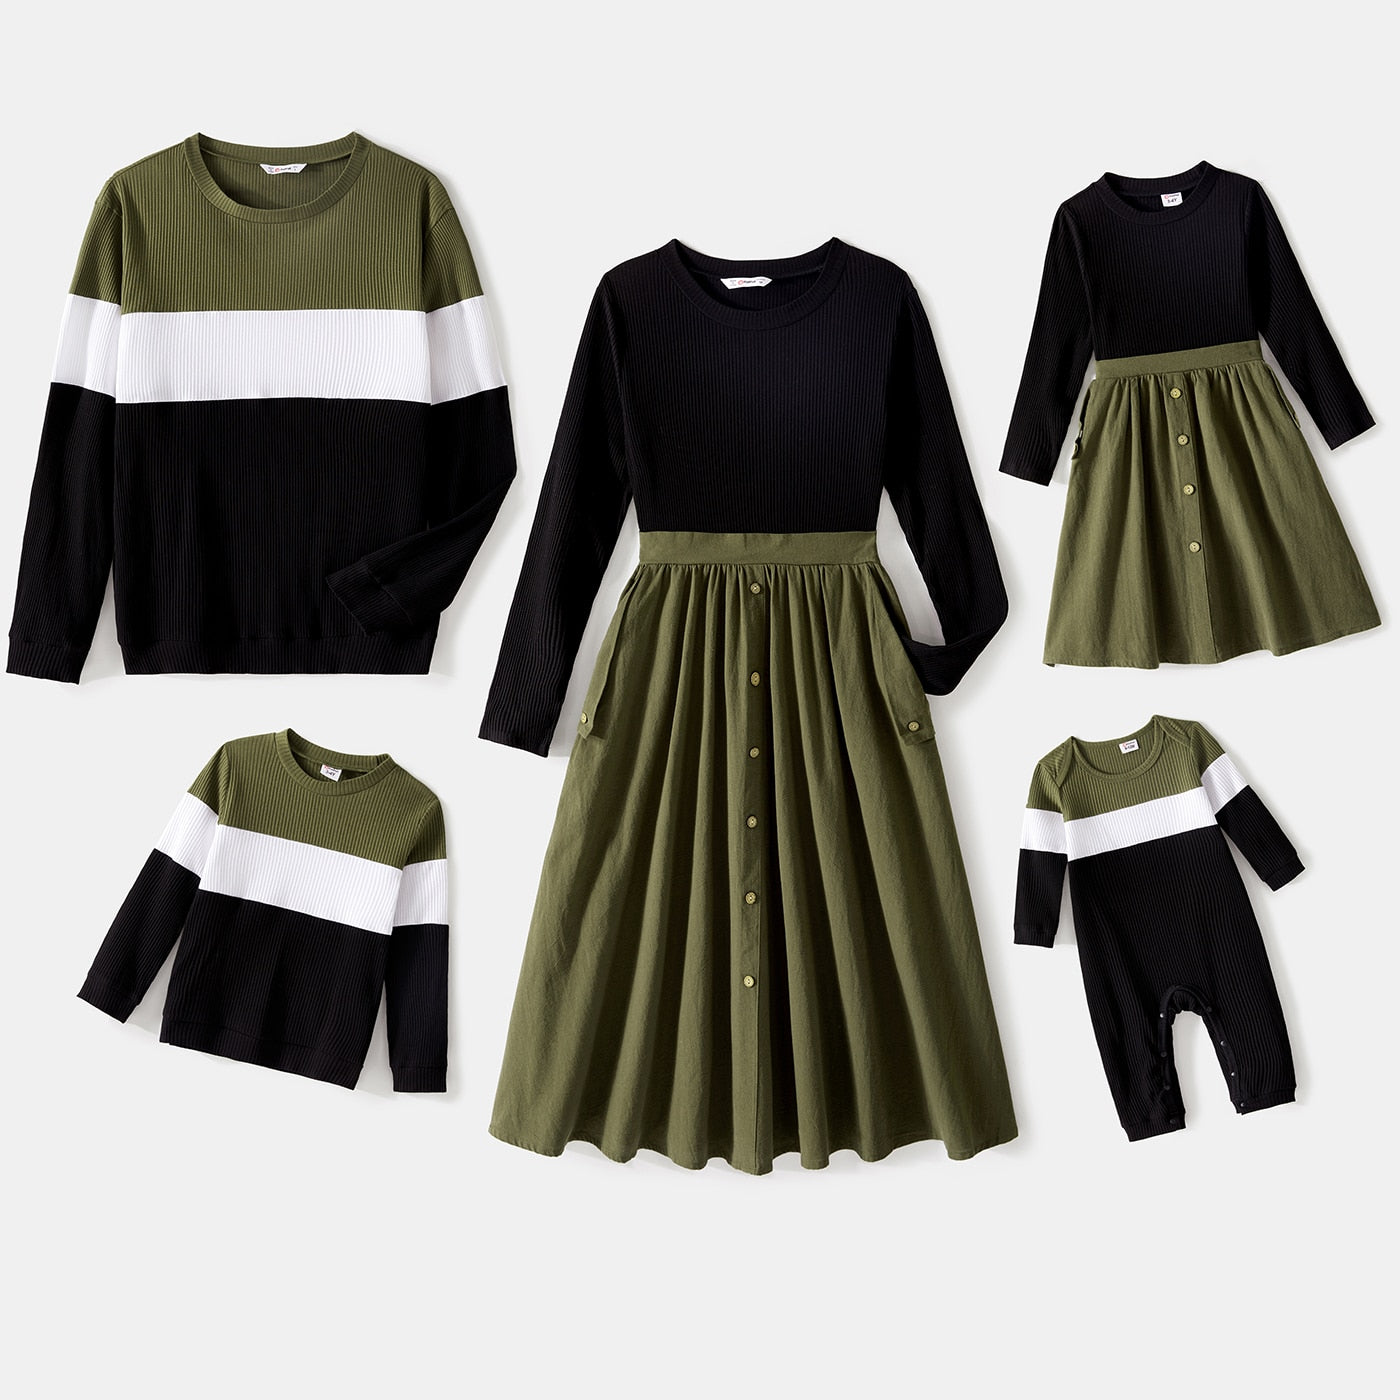 Family Matching! Long-Sleeve Rib-Knit Dresses, Jumpsuits, and Sweater Tops